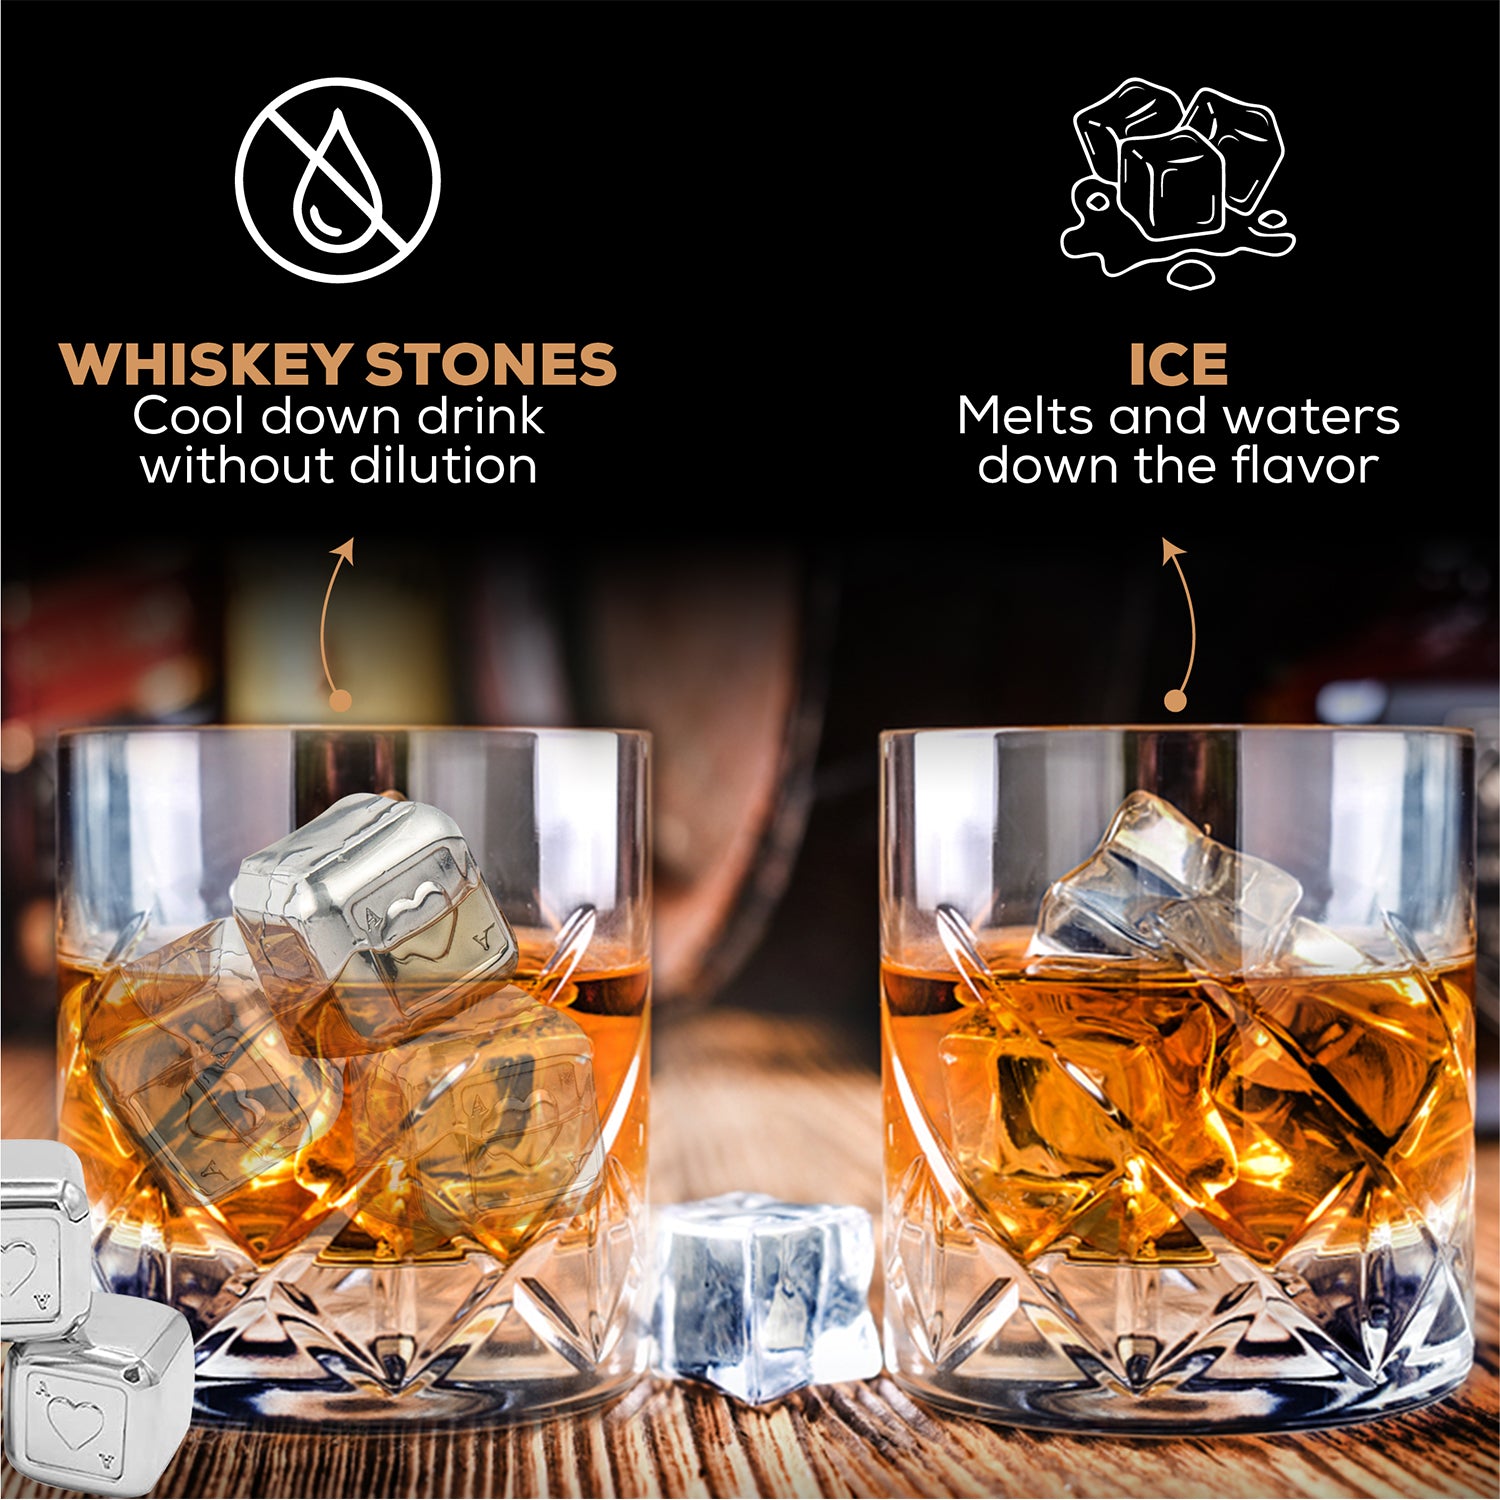 The Perfect Gift For Your Man- "To My Handsome Man" Whisky Glass Gift Set